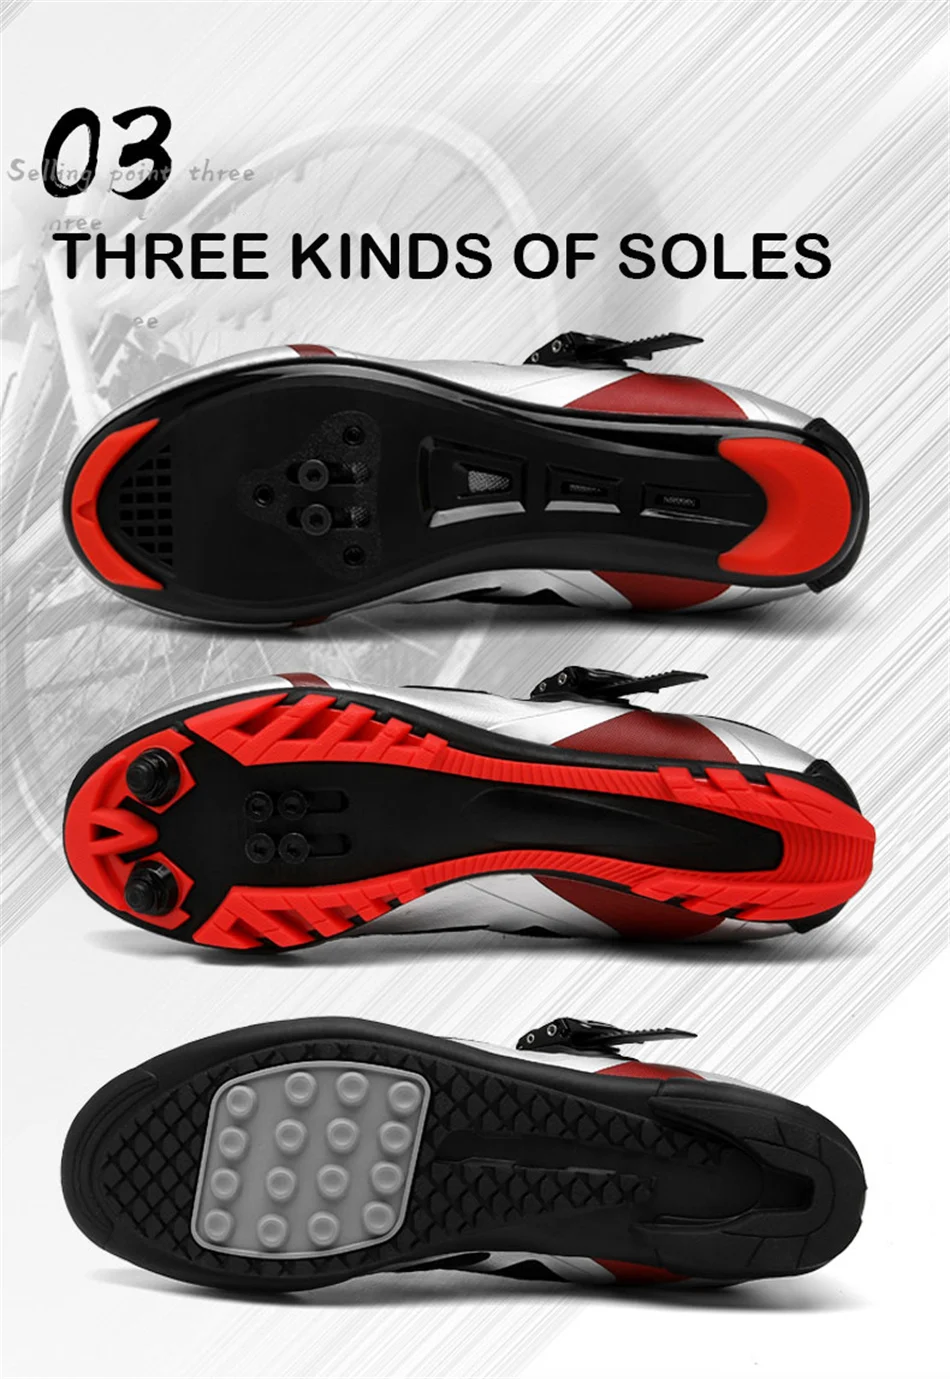 In the Saddle Cycling Sneaker for active riders6